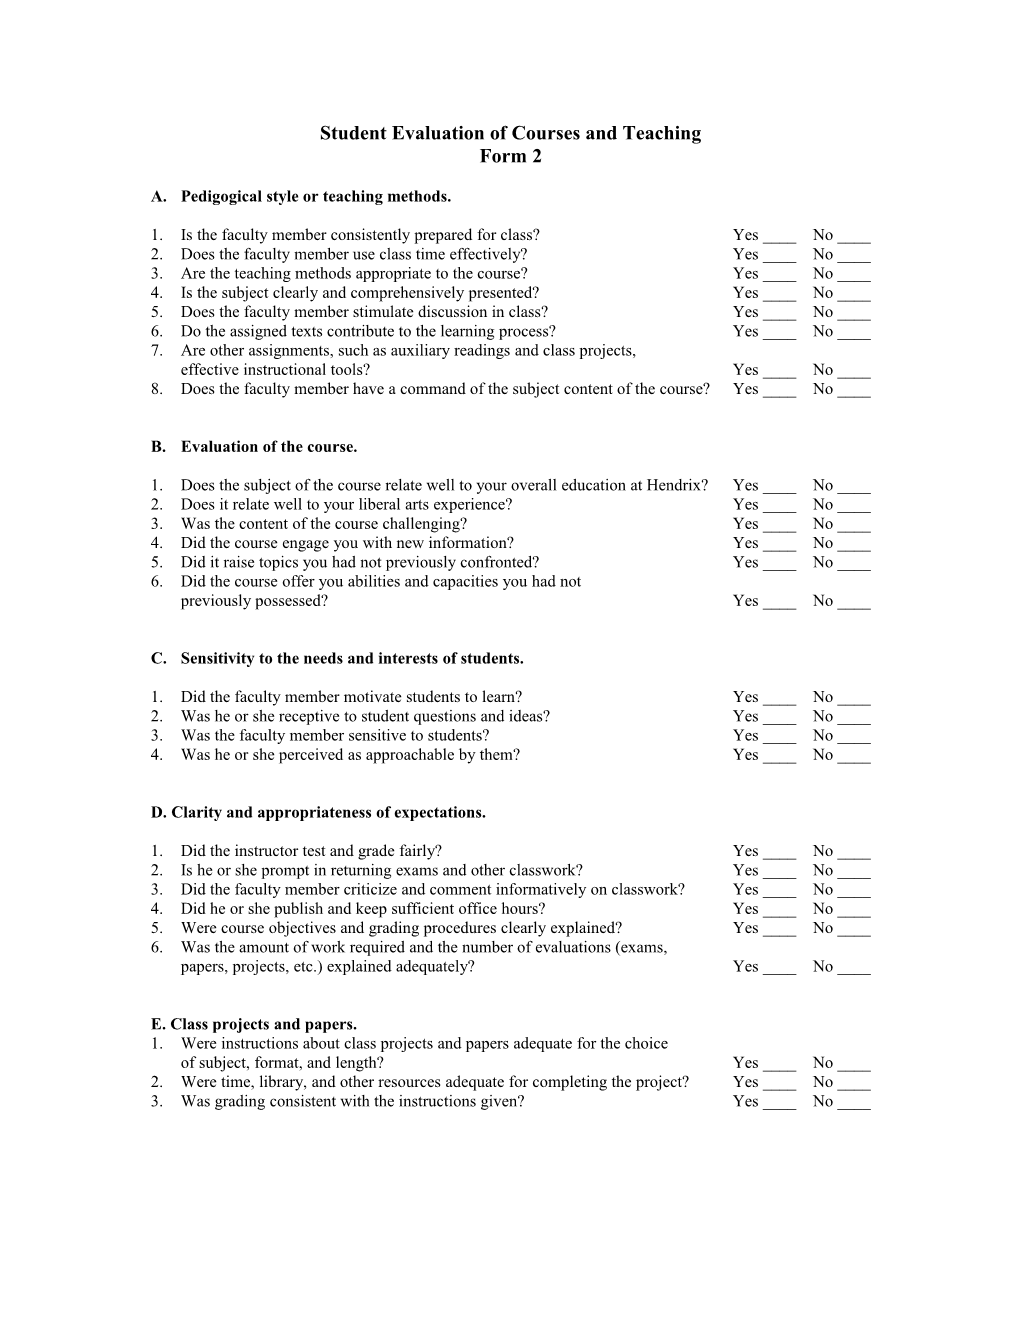 Student Evaluation of Courses and Teaching